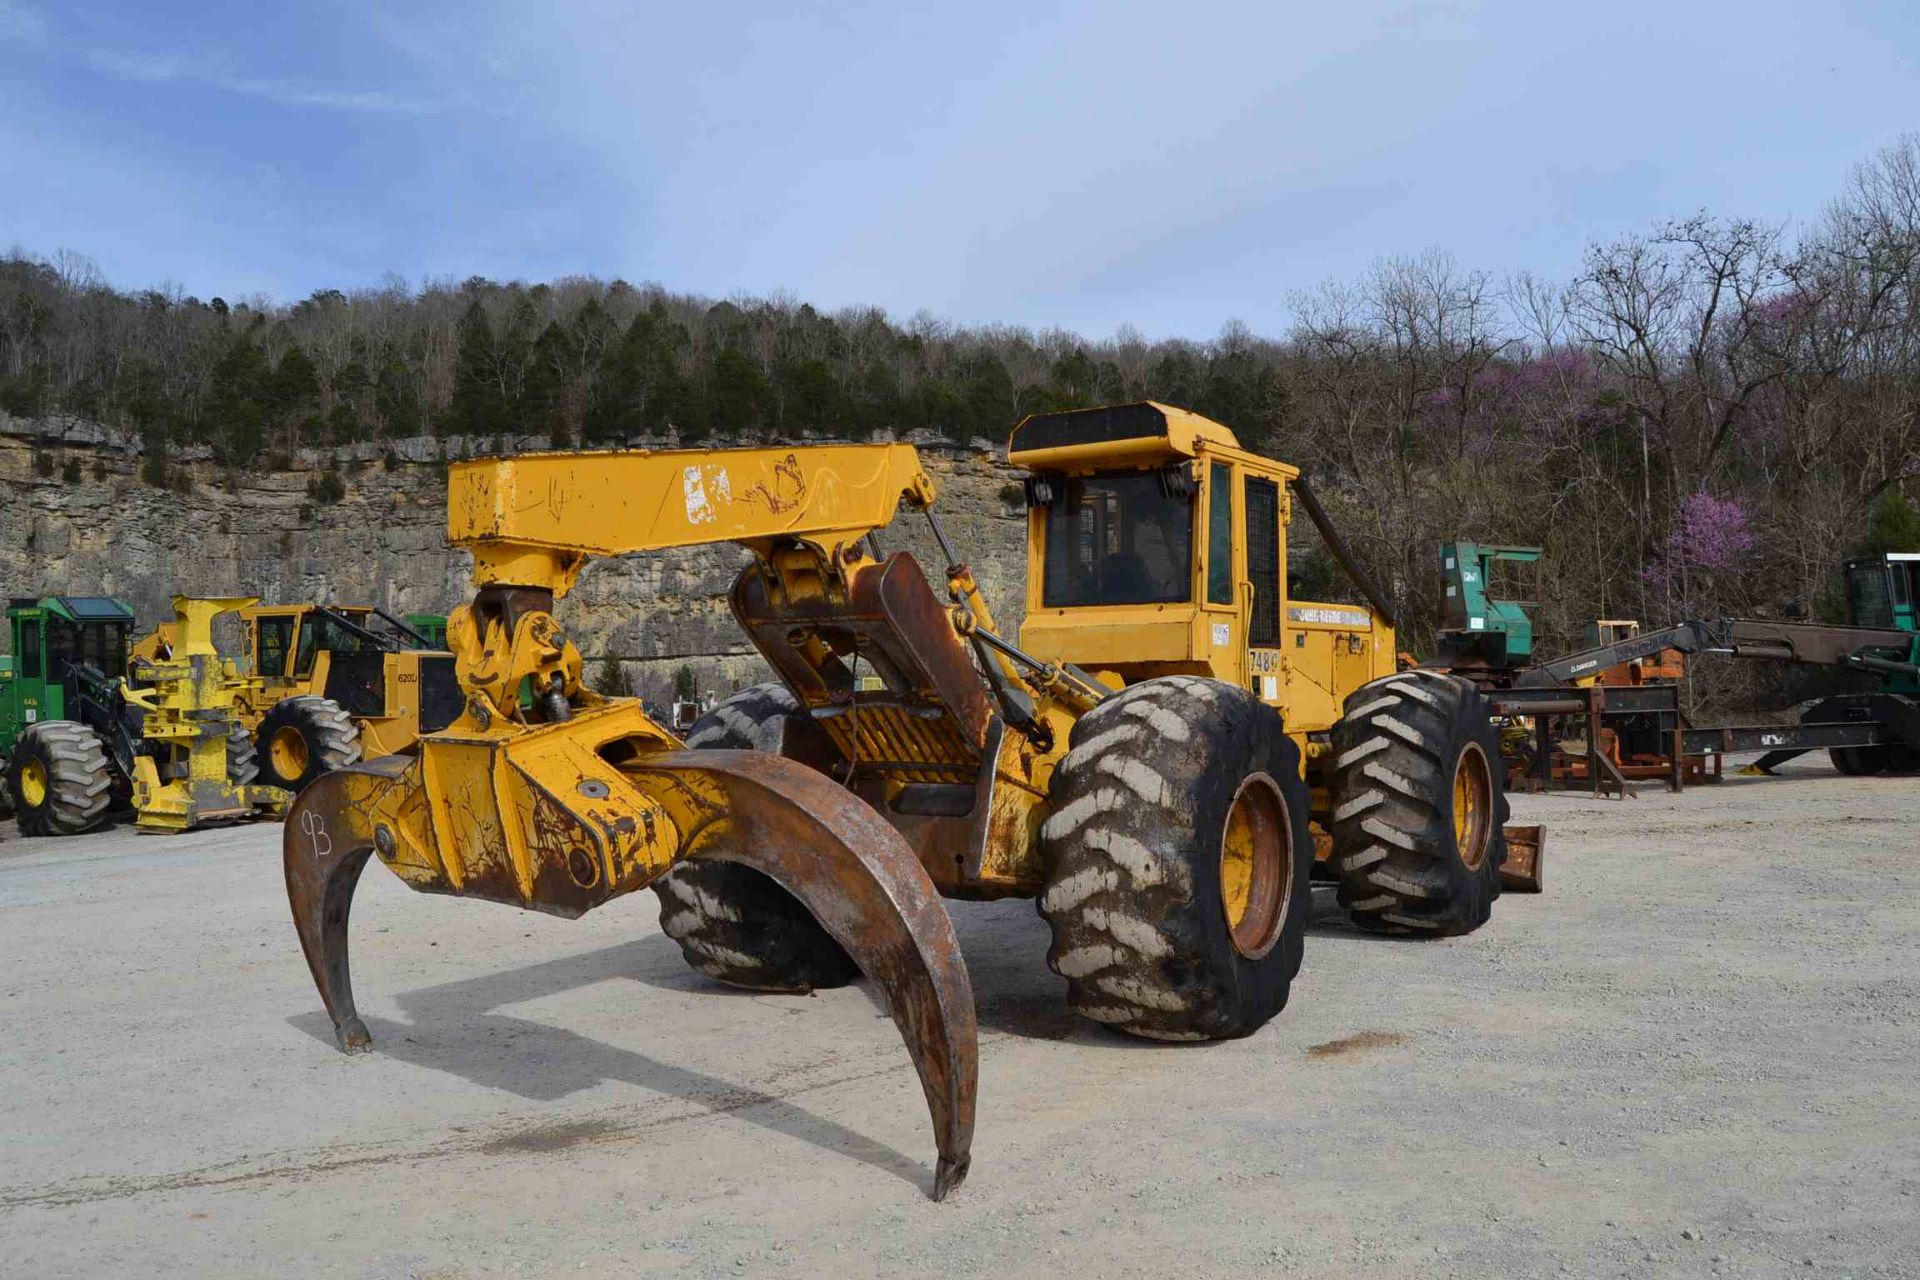 1998 JOHN DEERE 748G DUAL ARCH GRAPPLE SKIDDER W/30.5X32 RUBBER; S/N-565595; W/8,710 HOURS - Image 3 of 4